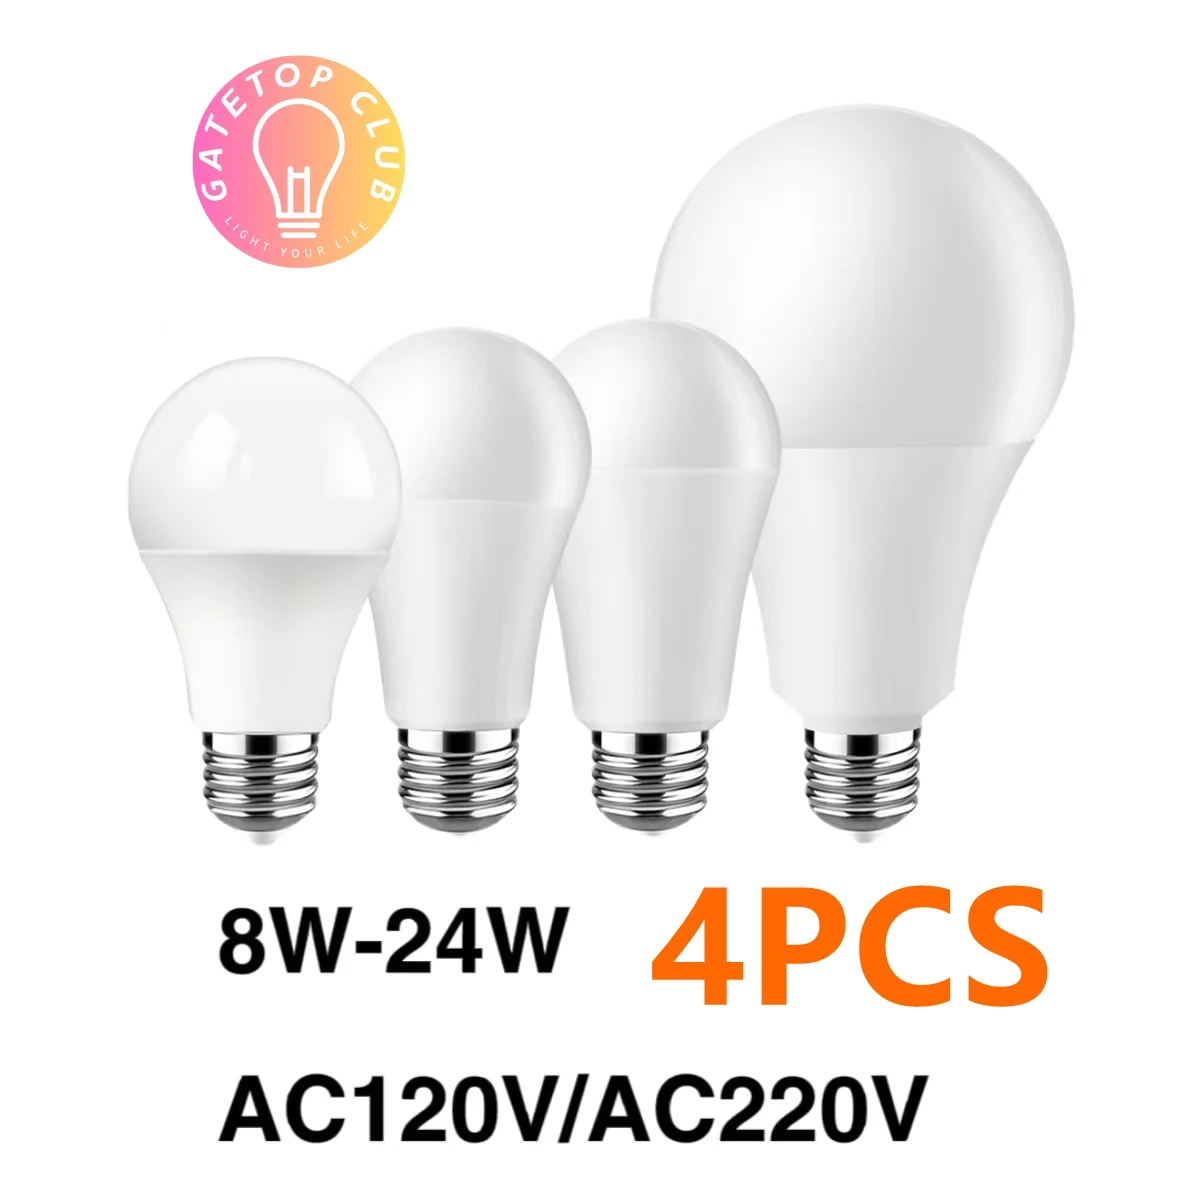 

4pcs/LOT Led Bulb Lamps E27 B22 AC120V/AC220V Power 8W 9W 10W 12W 15W 18W 20W 24W Warm White Day White Cold White Lamps for Home